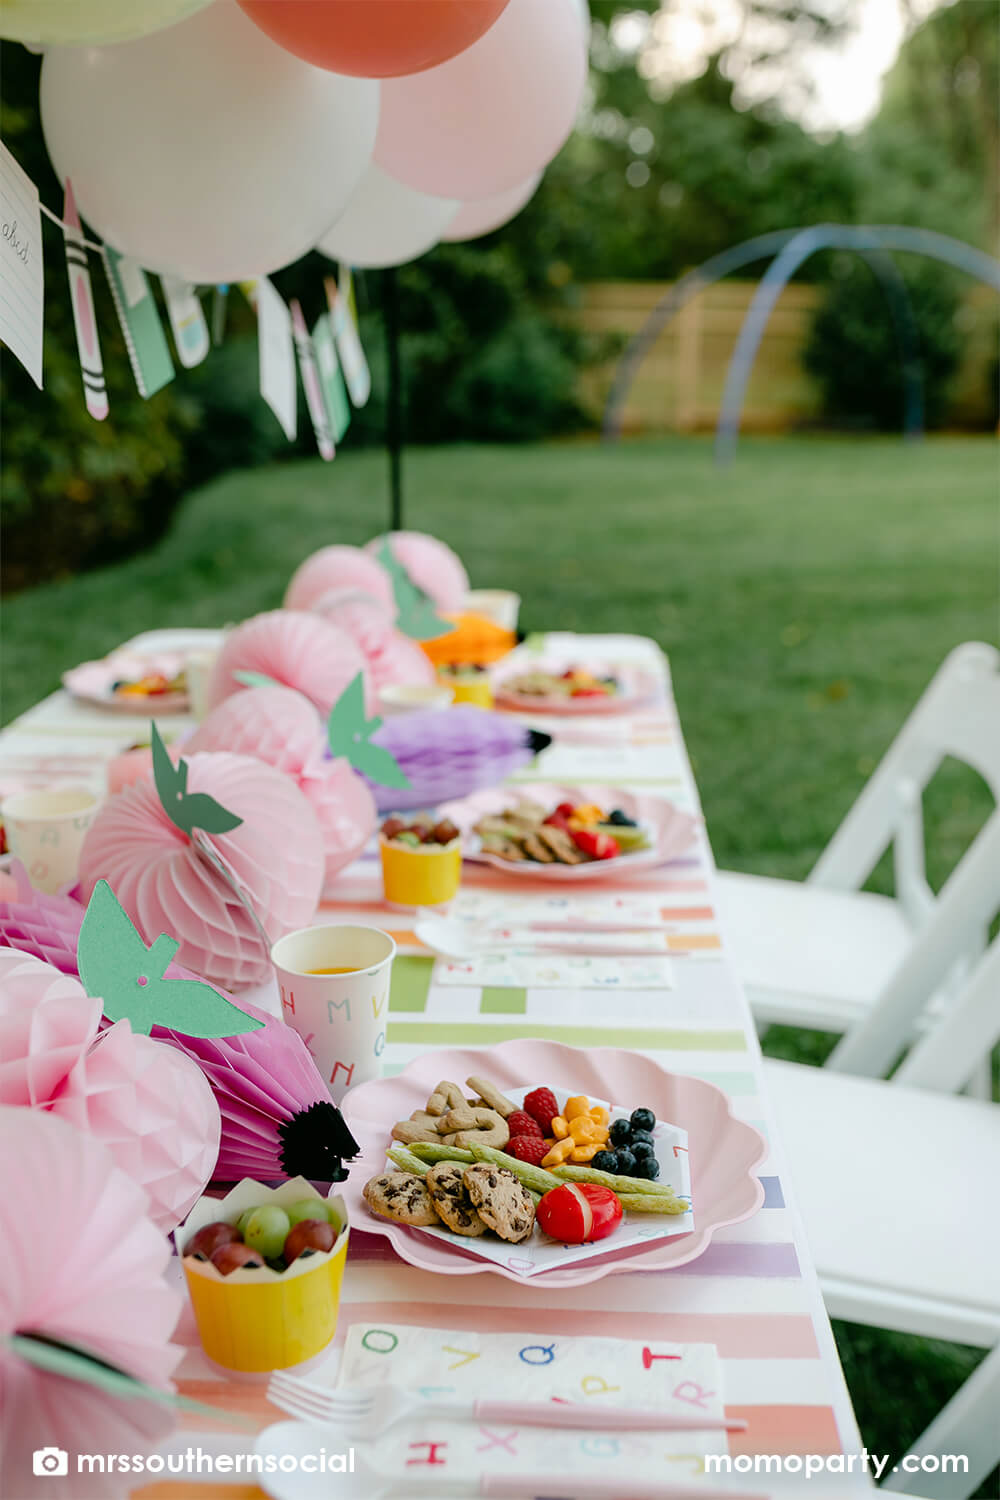 A backyard pastel themed back to school party table set up and decoration featuring Momo Party's back to school themed party goods including back to school party garland, pink apple honeycombs and rainbow pastel pencil honeycombs as the centerpiece, ABC alphabet plates, party cups and napkins. With kids snacks including ABC alphabet crackers, fruits, cheese, it gives great ideas and inspo for celebrating kid's first day of school.